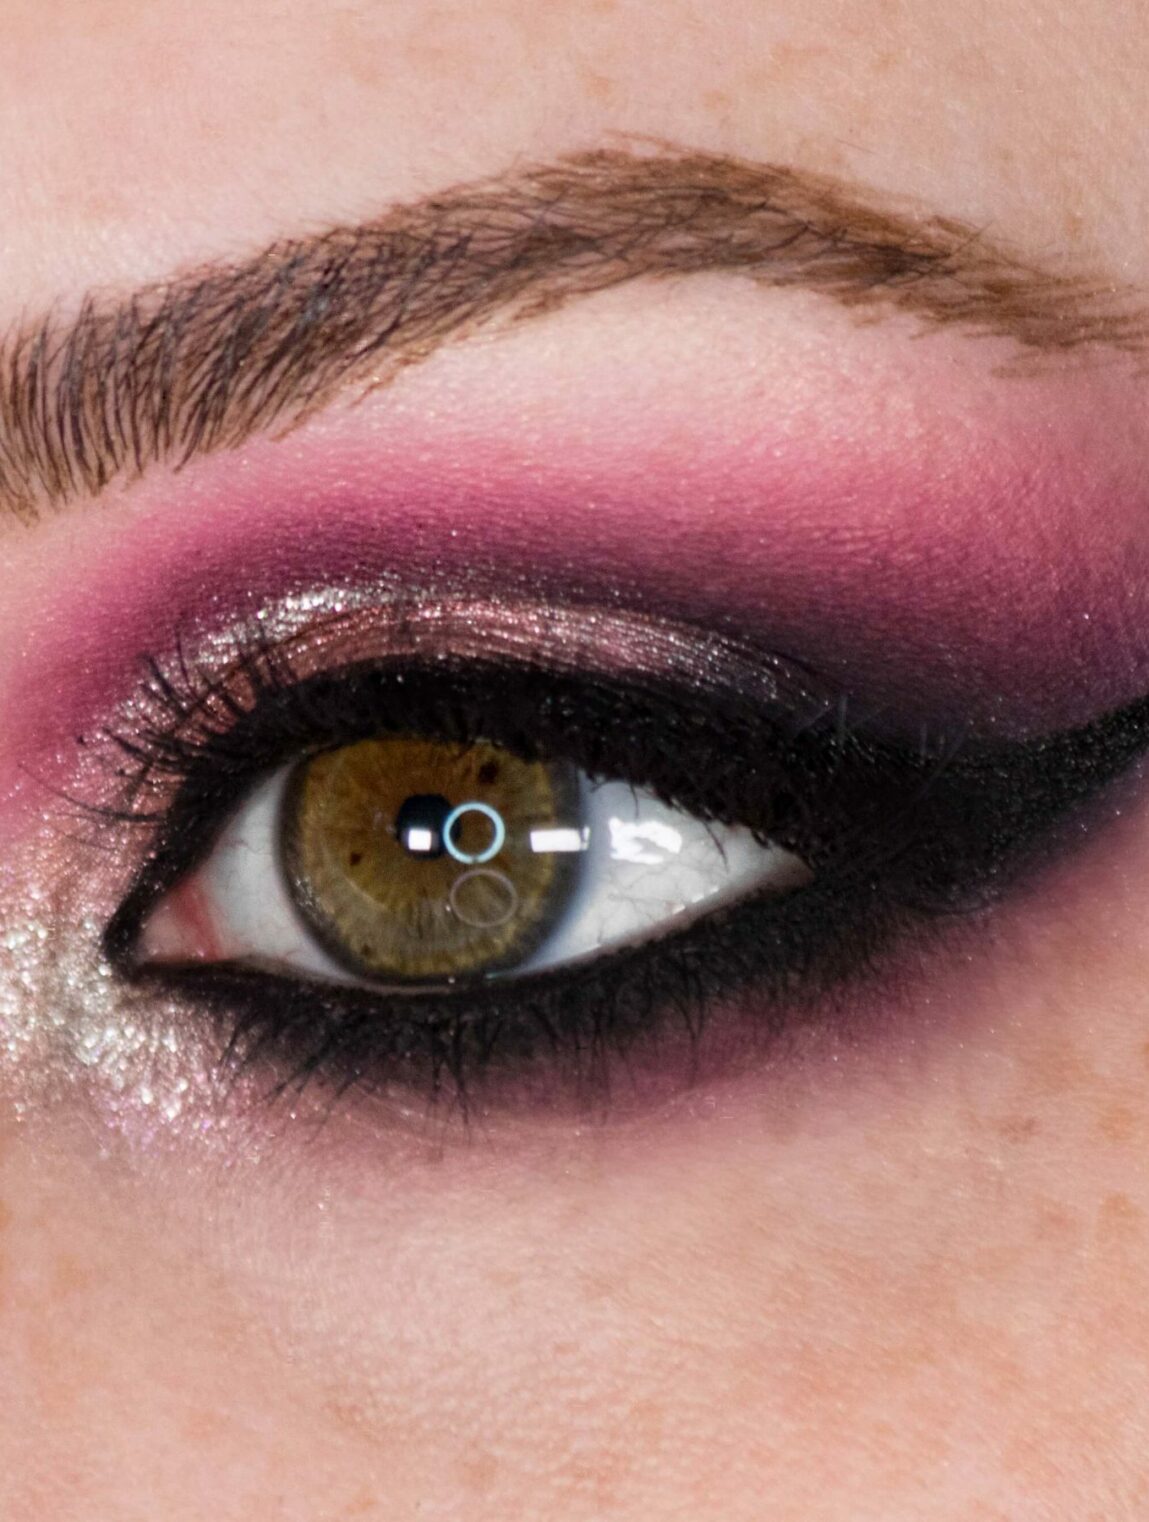 Glam It Up With Glitter: DIY Makeup Guide - Light Glitter to Smokey Eye Step 4